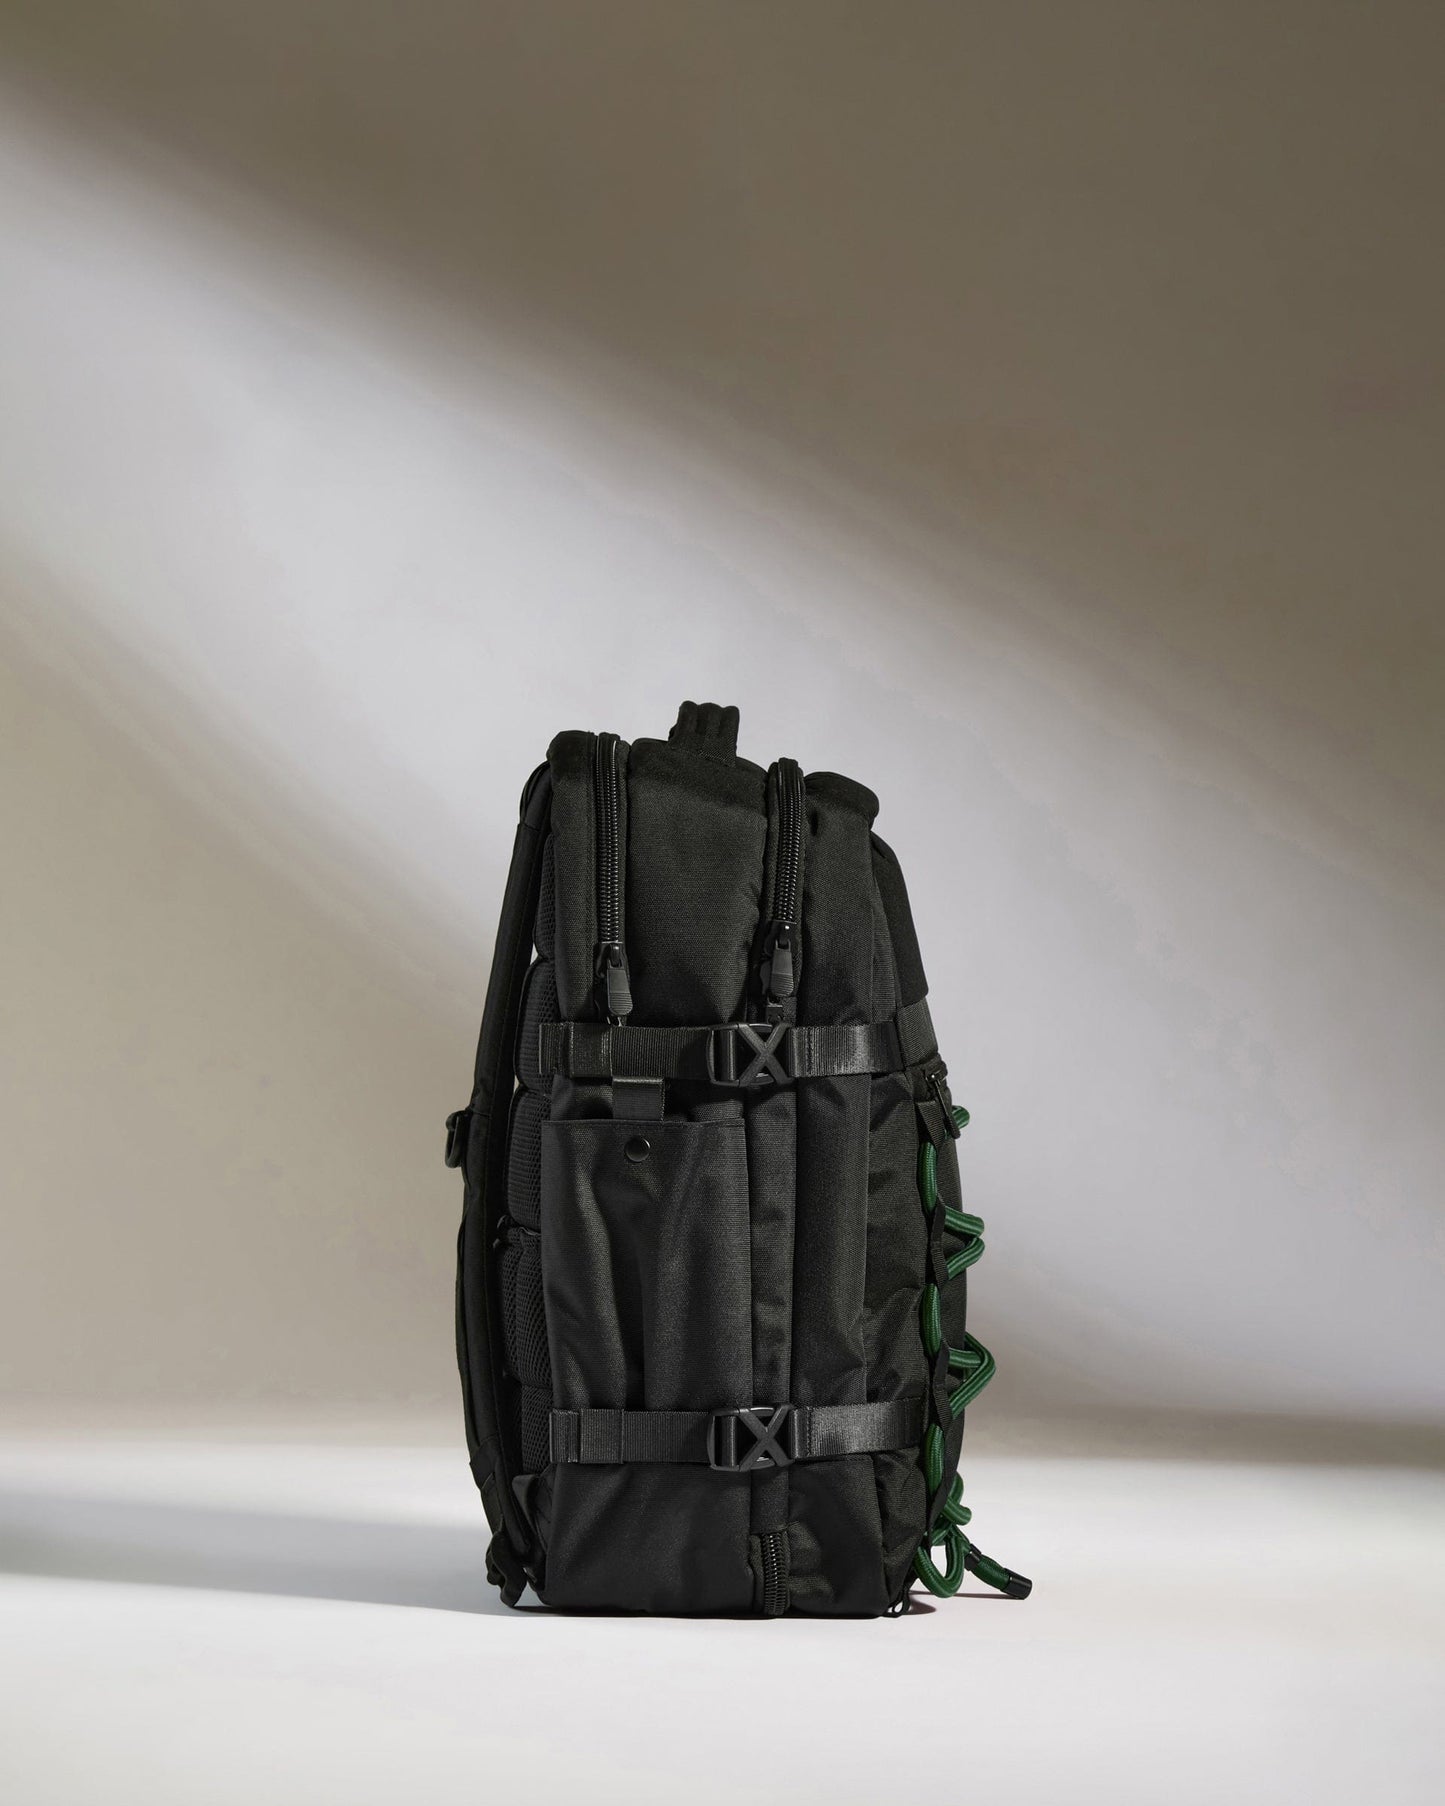 Antler Luggage -  Discovery Backpack in Antler Green - Backpack Discovery Backpack in Green | Rucksacks & Travel Bags